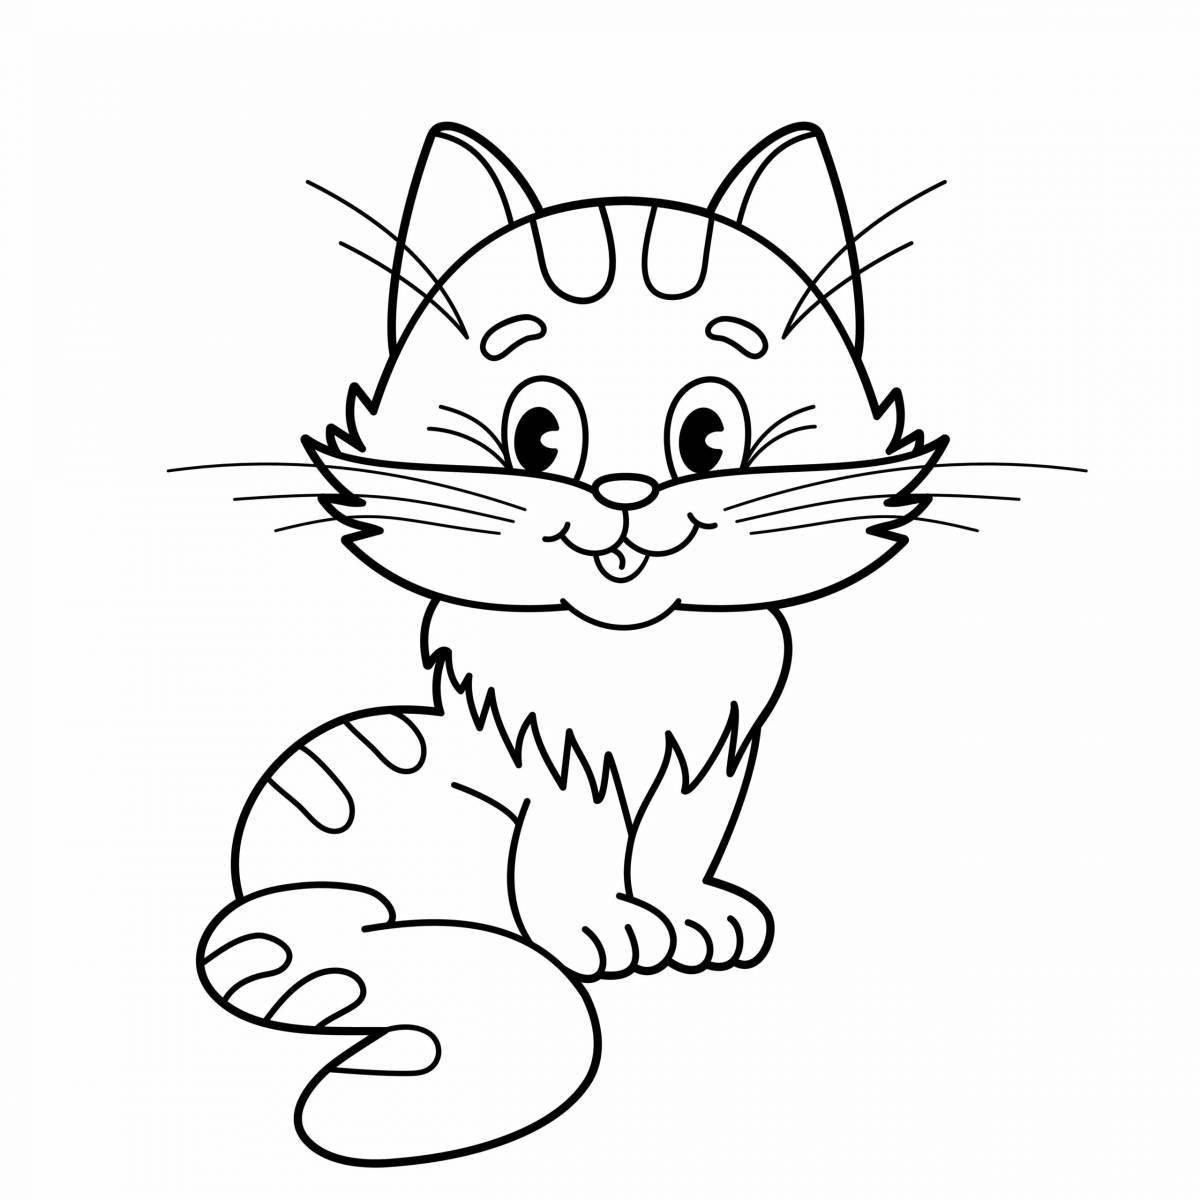 Snuggly tabby kitten coloring page